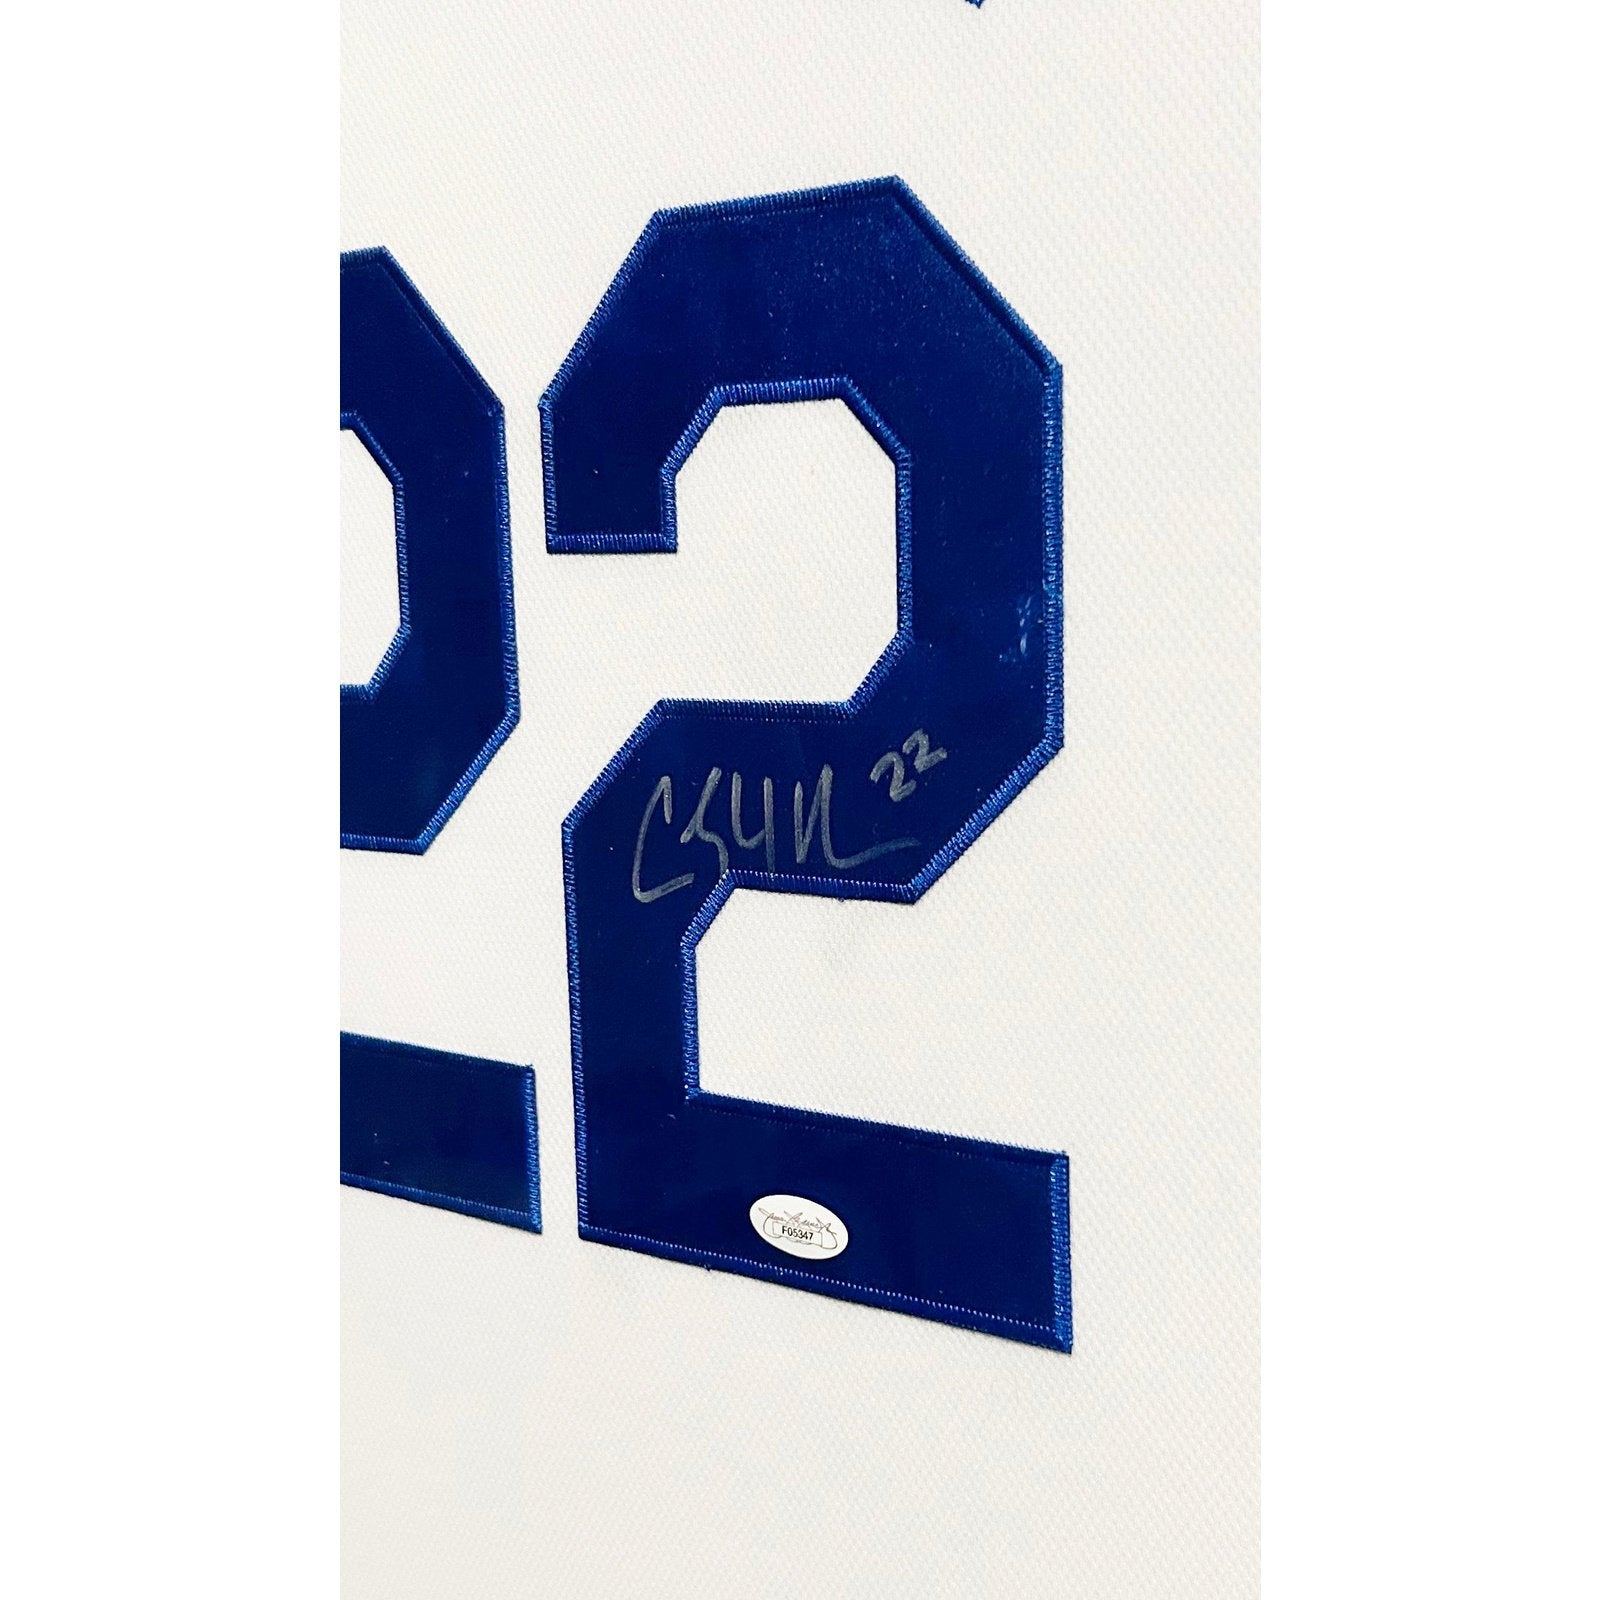 Clayton Kershaw Signed Autographed Jersey Authentic Dodgers White 56  Beckett WIT